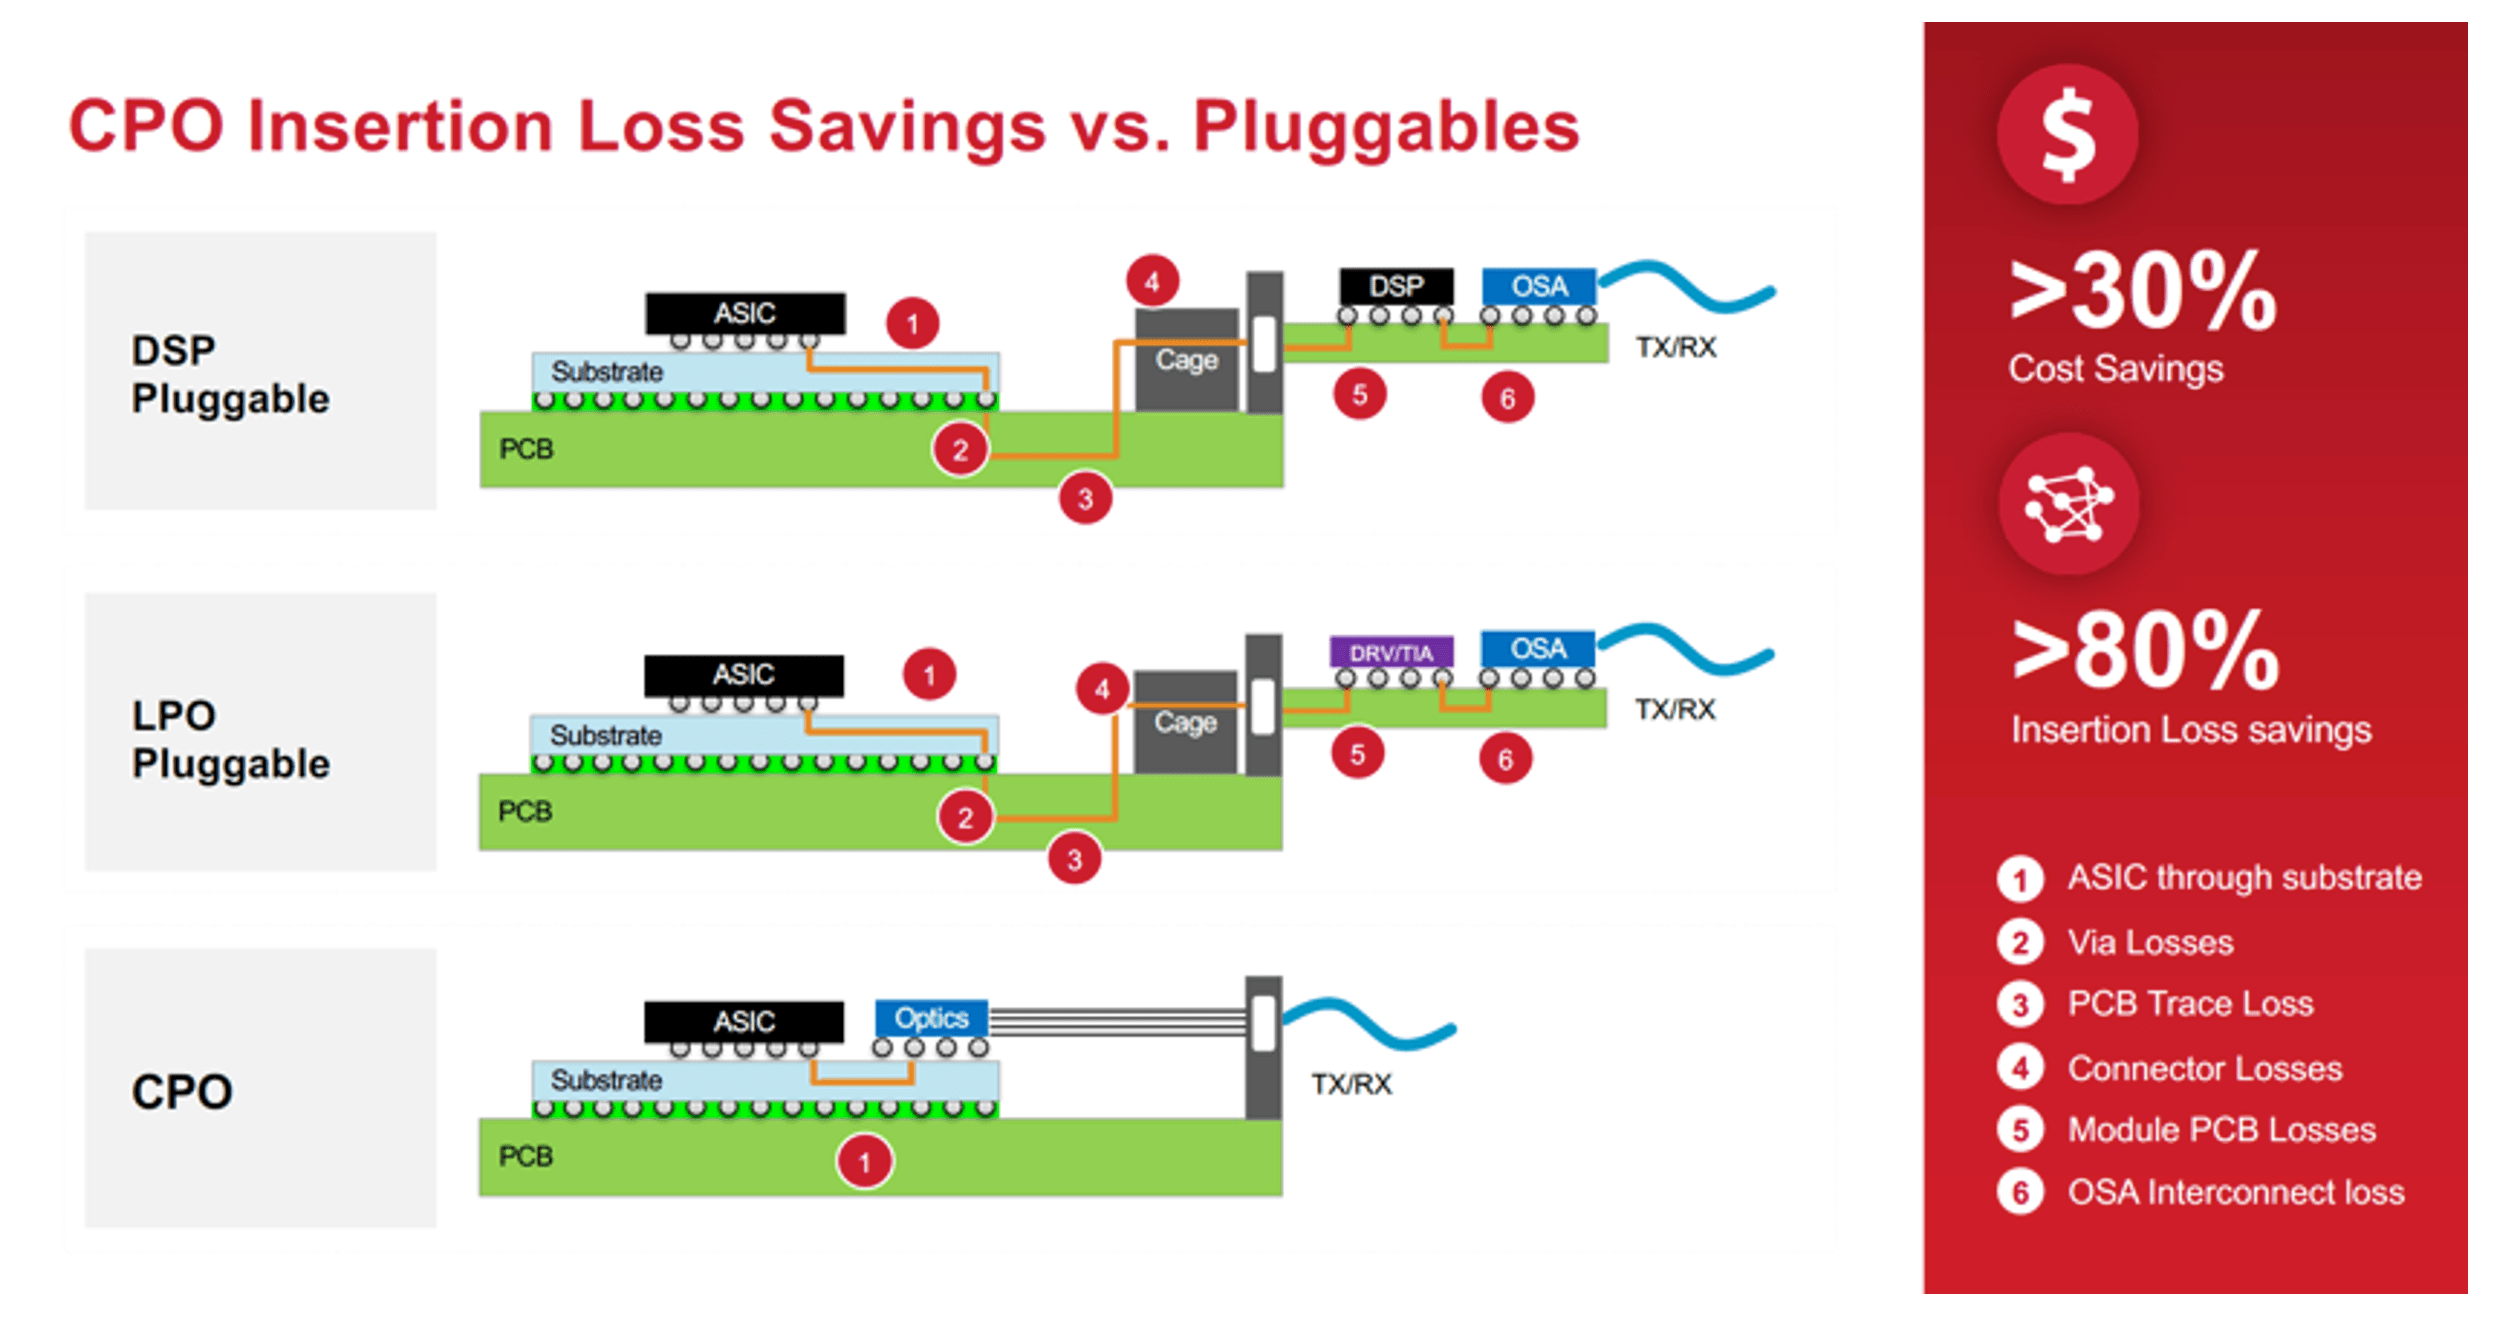 Fig. 1: Co-packaged optics insertion loss savings compared to pluggables. Broadcom sees linear drive pluggable optics as an intermediate step. Source: Broadcom